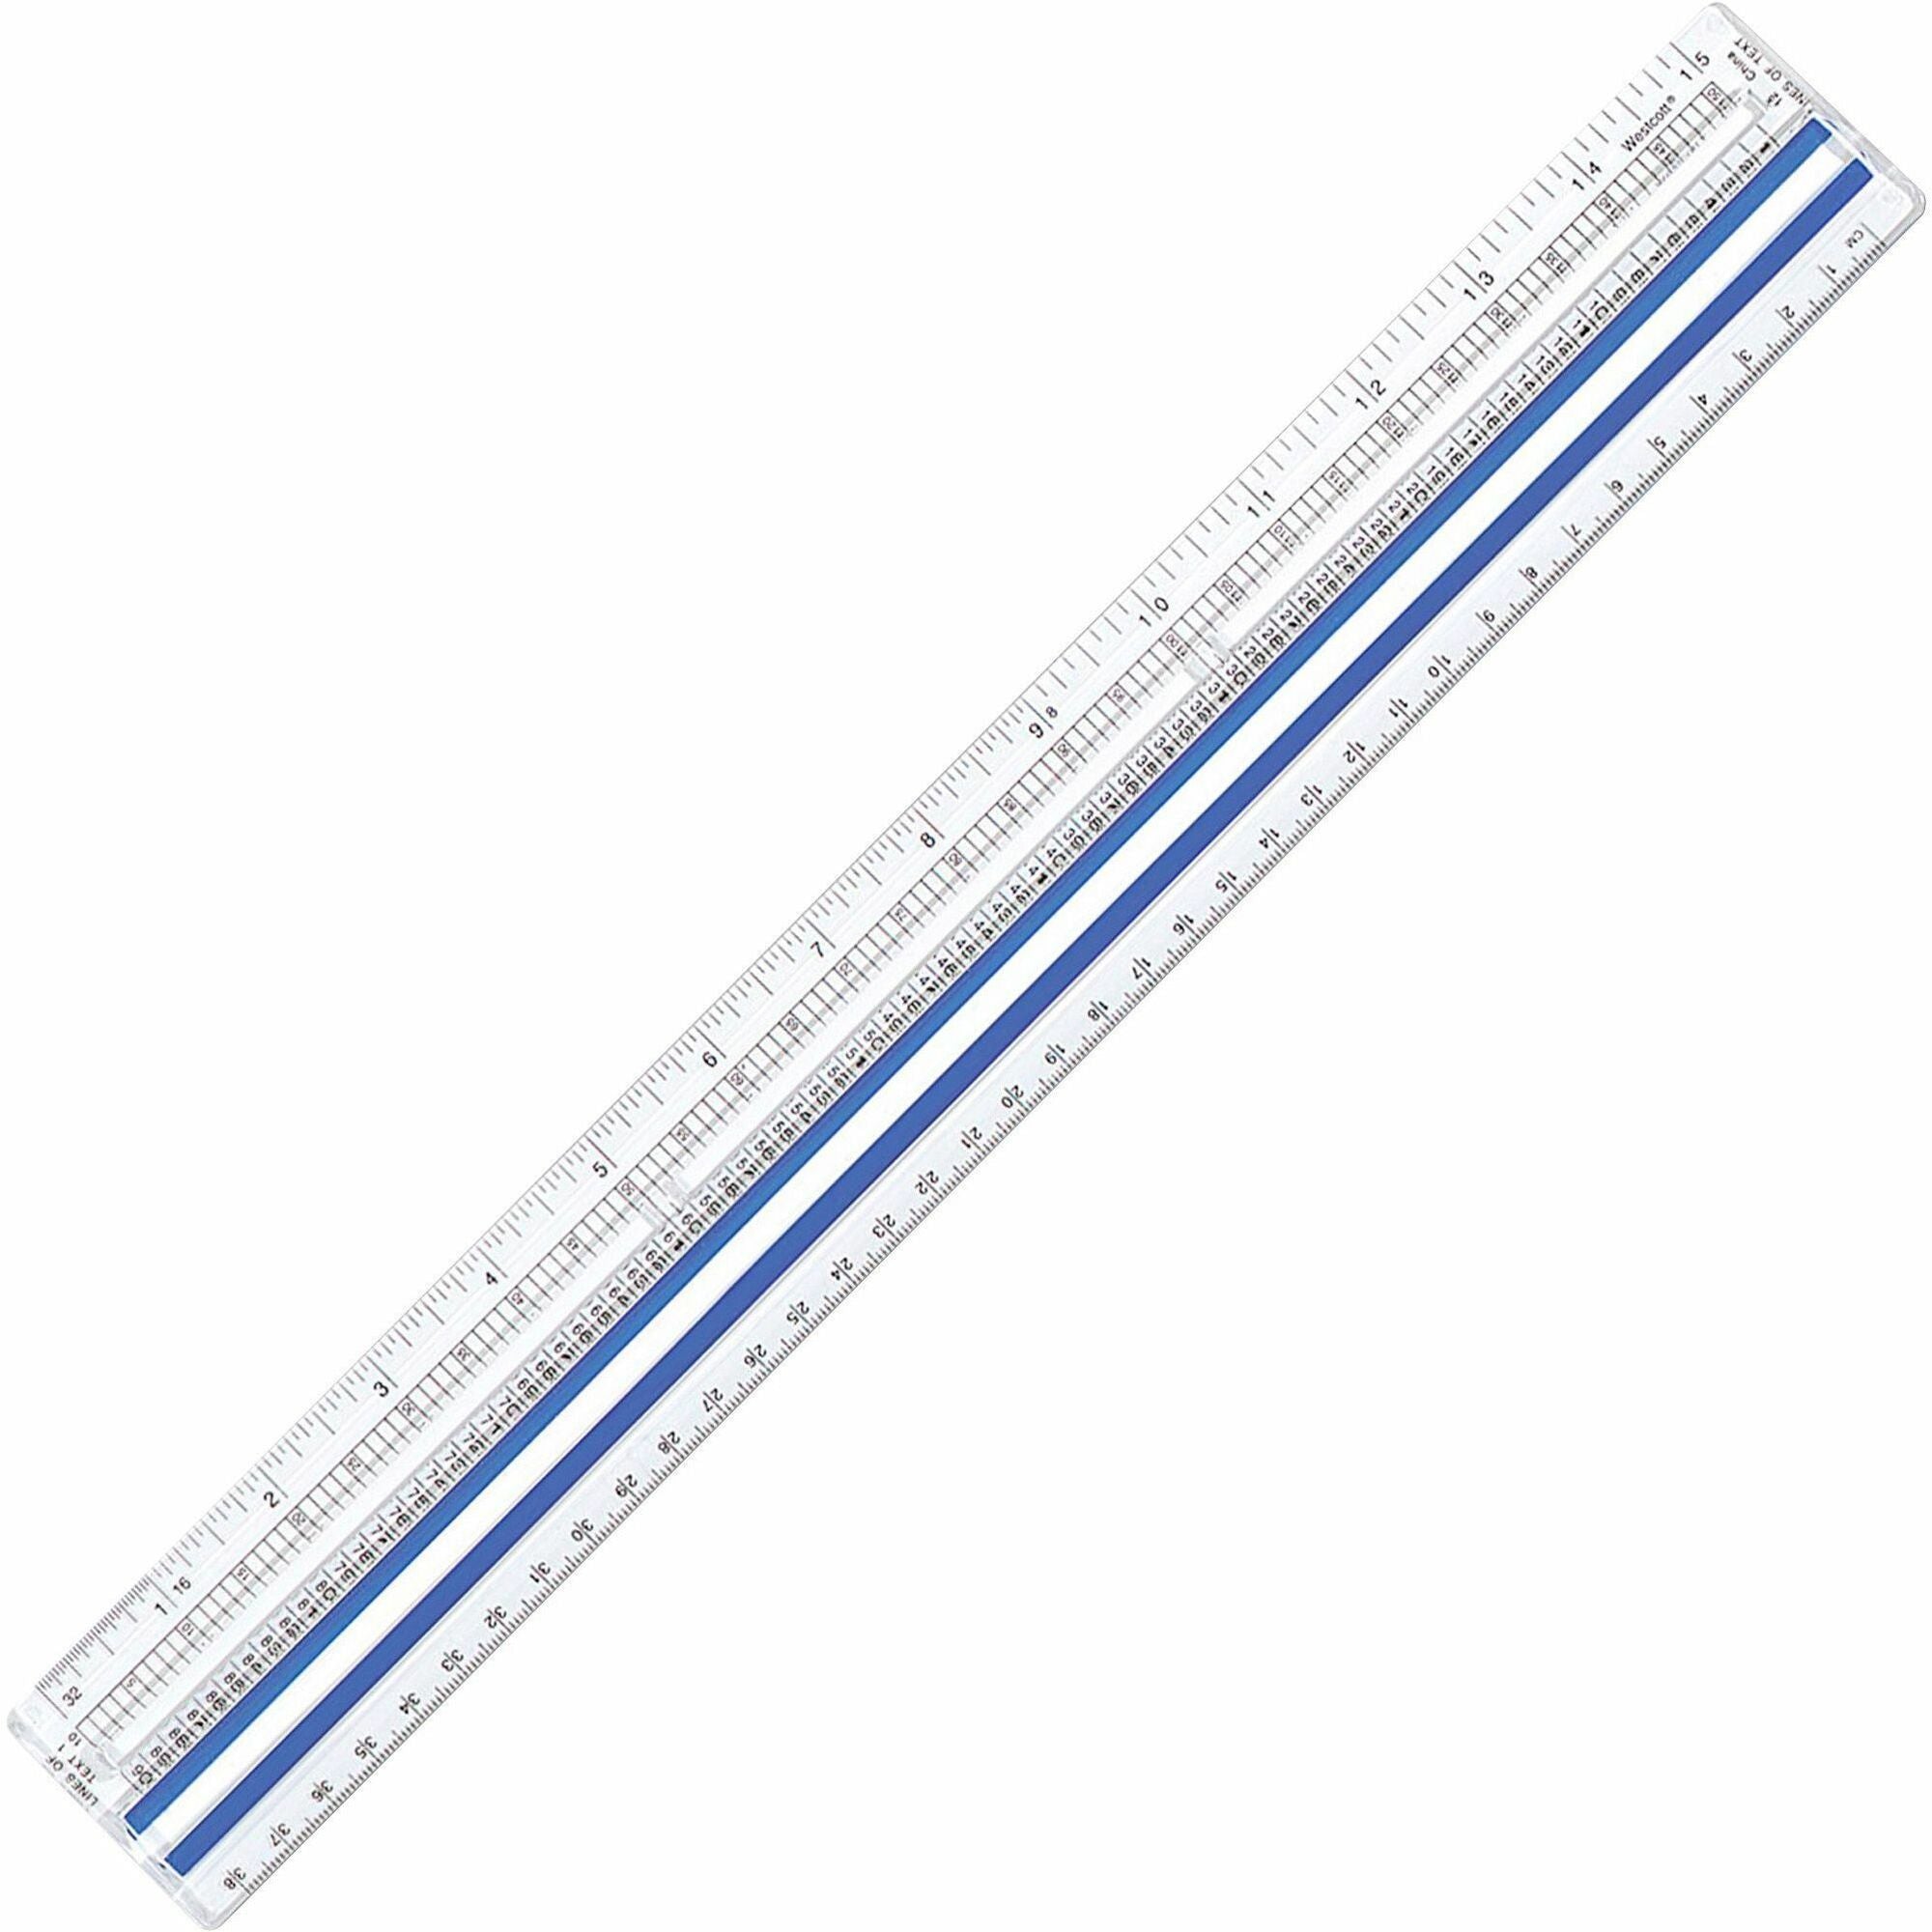 westcott-magnifying-computer-printout-rulers-15-length-1-width-1-16-graduations-imperial-metric-measuring-system-acrylic-1-each-clear_acm40711 - 1